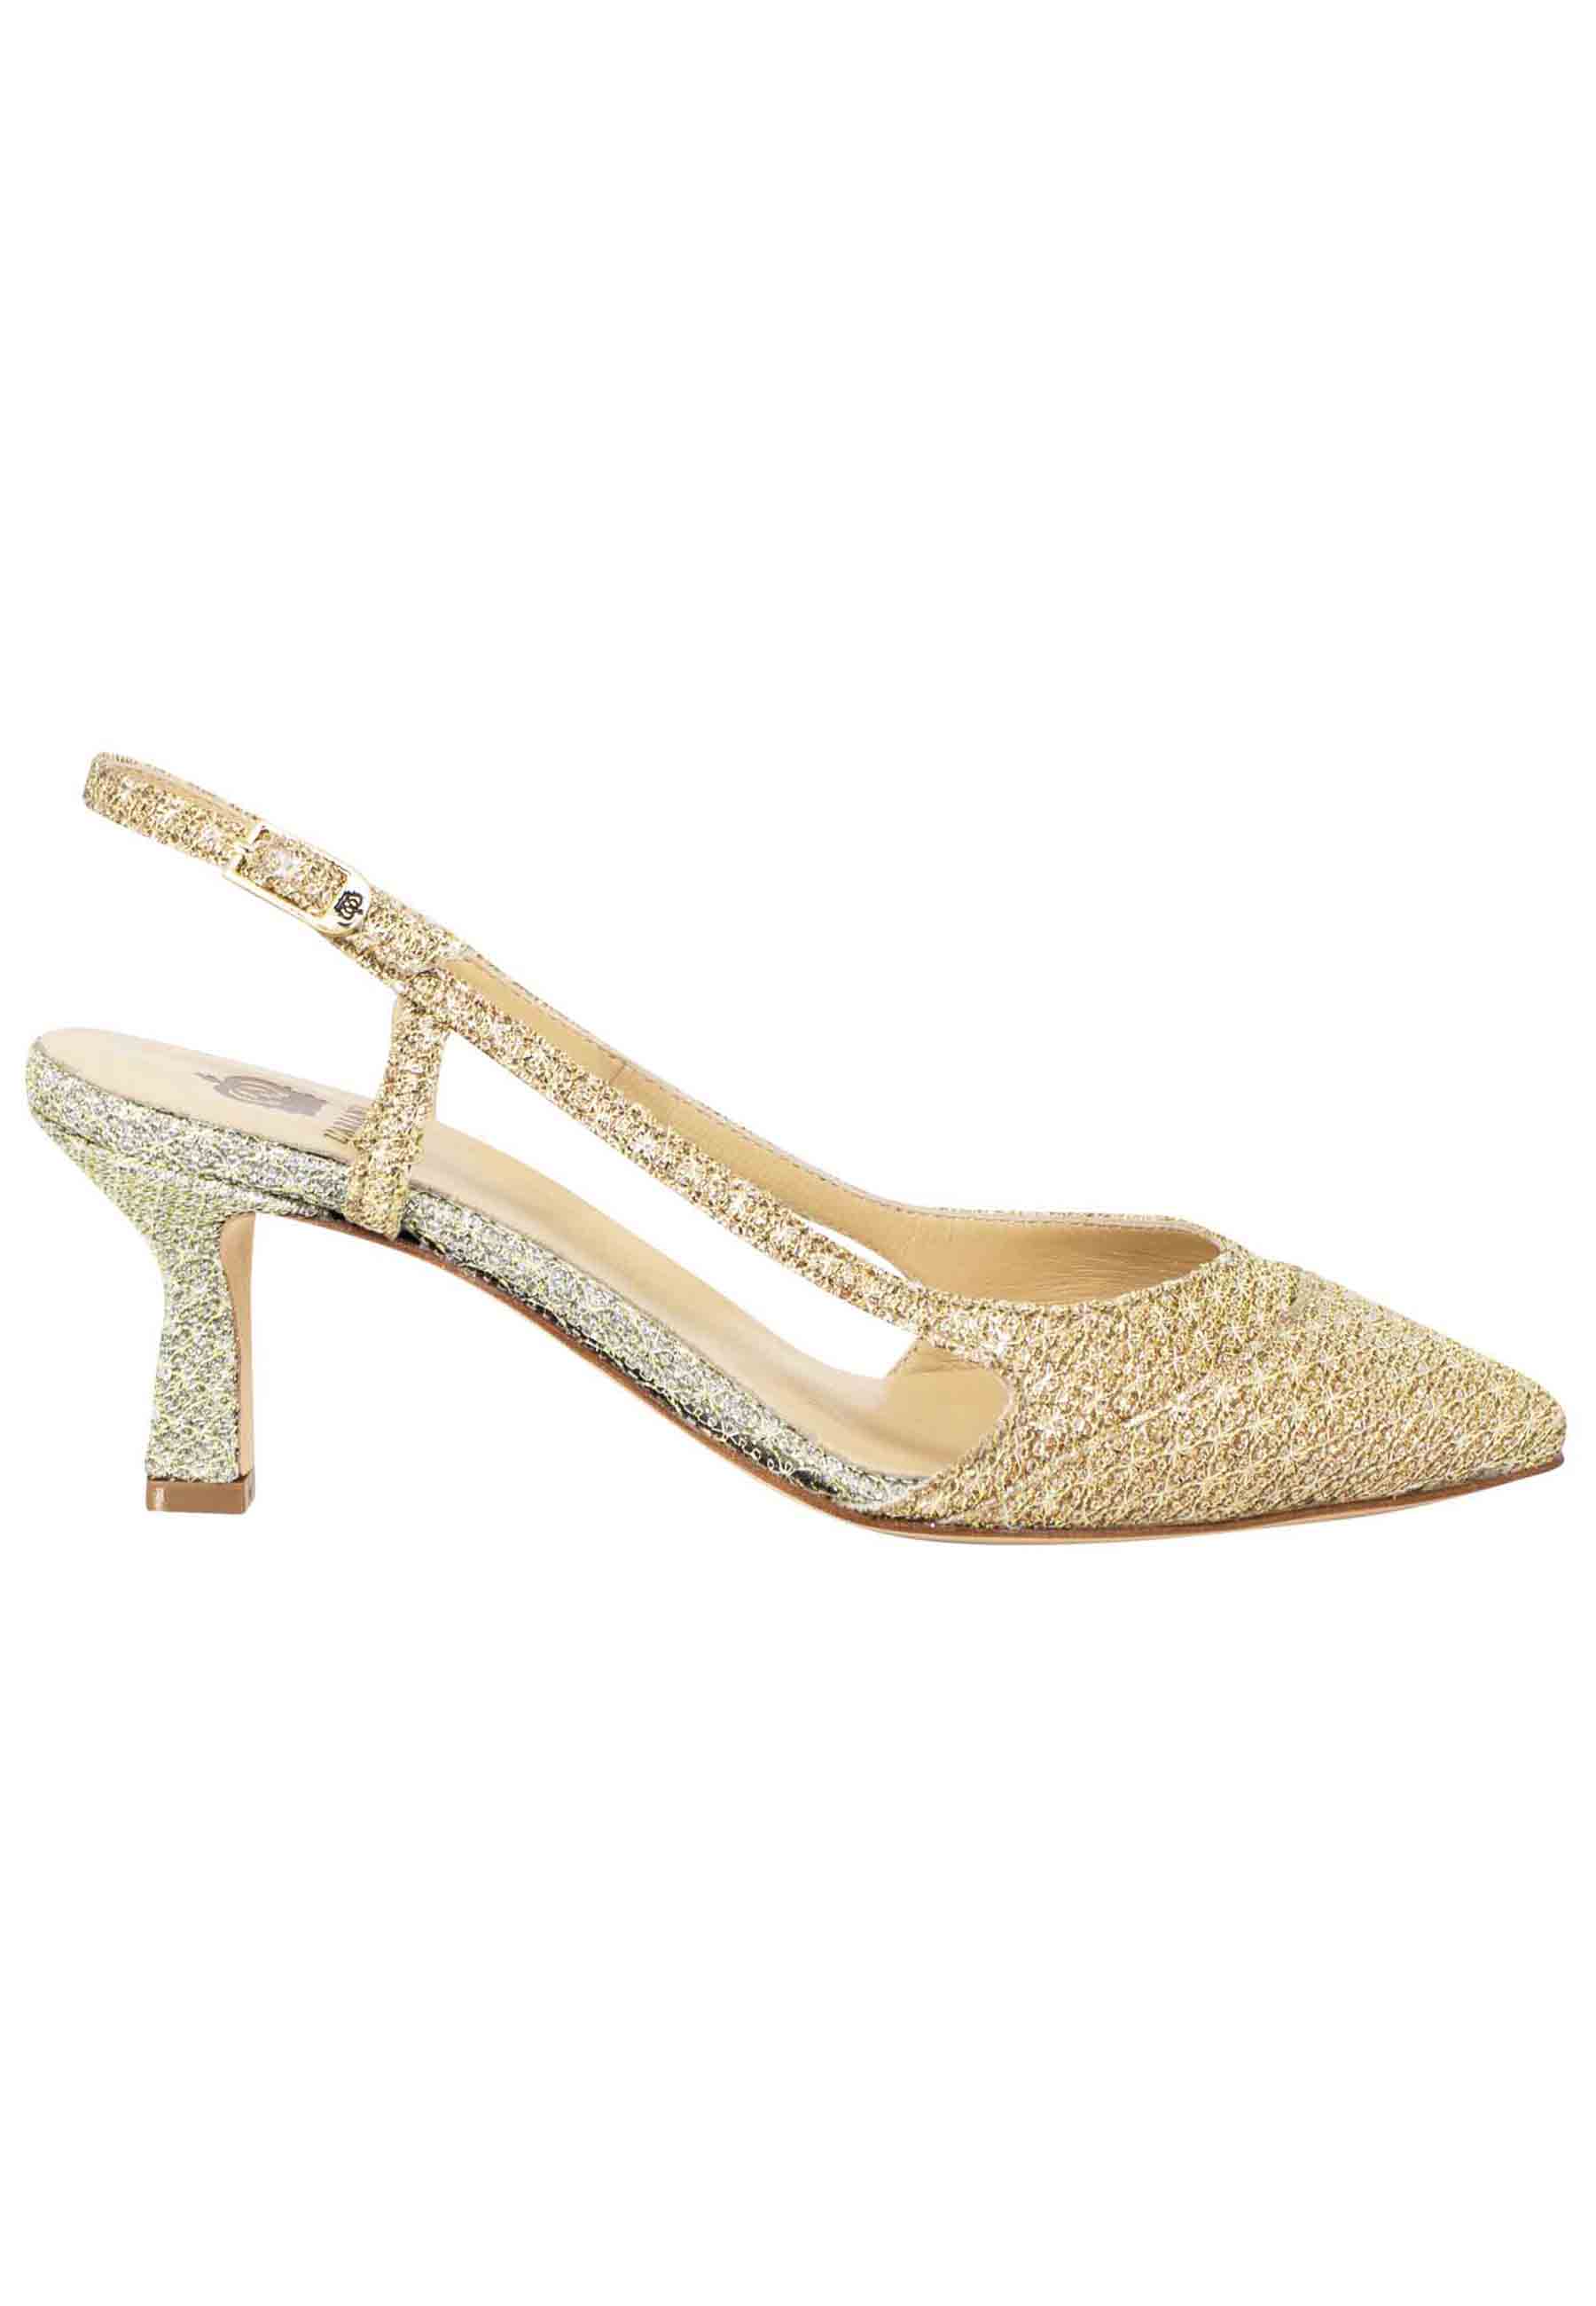 Women's slingback pumps in platinum and gold fabric